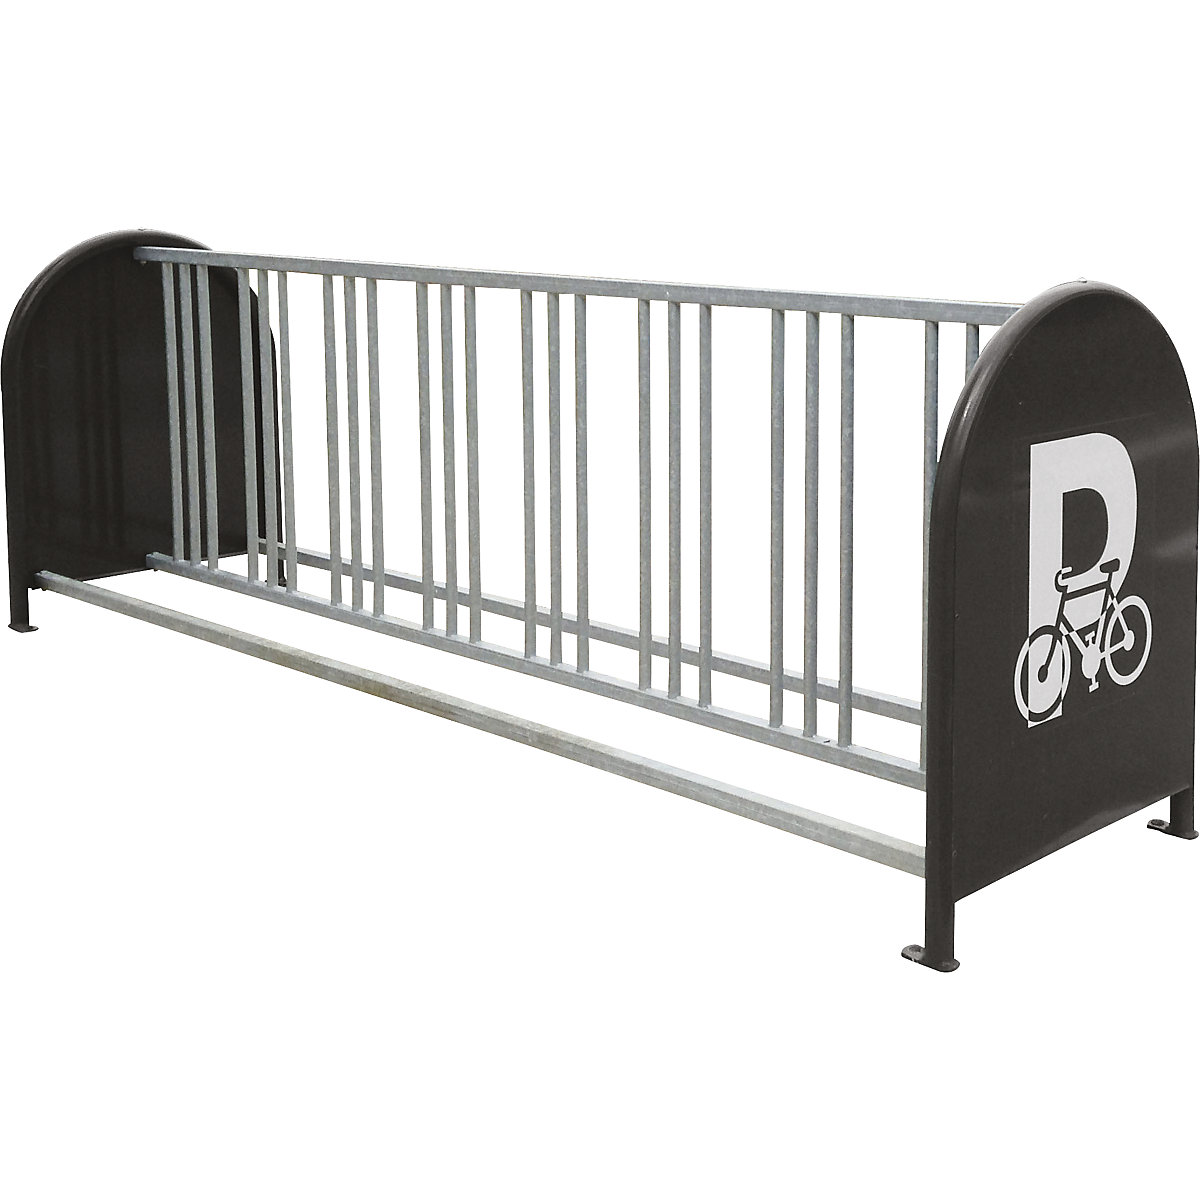 Bicycle rack with 16 parking spots – PROCITY